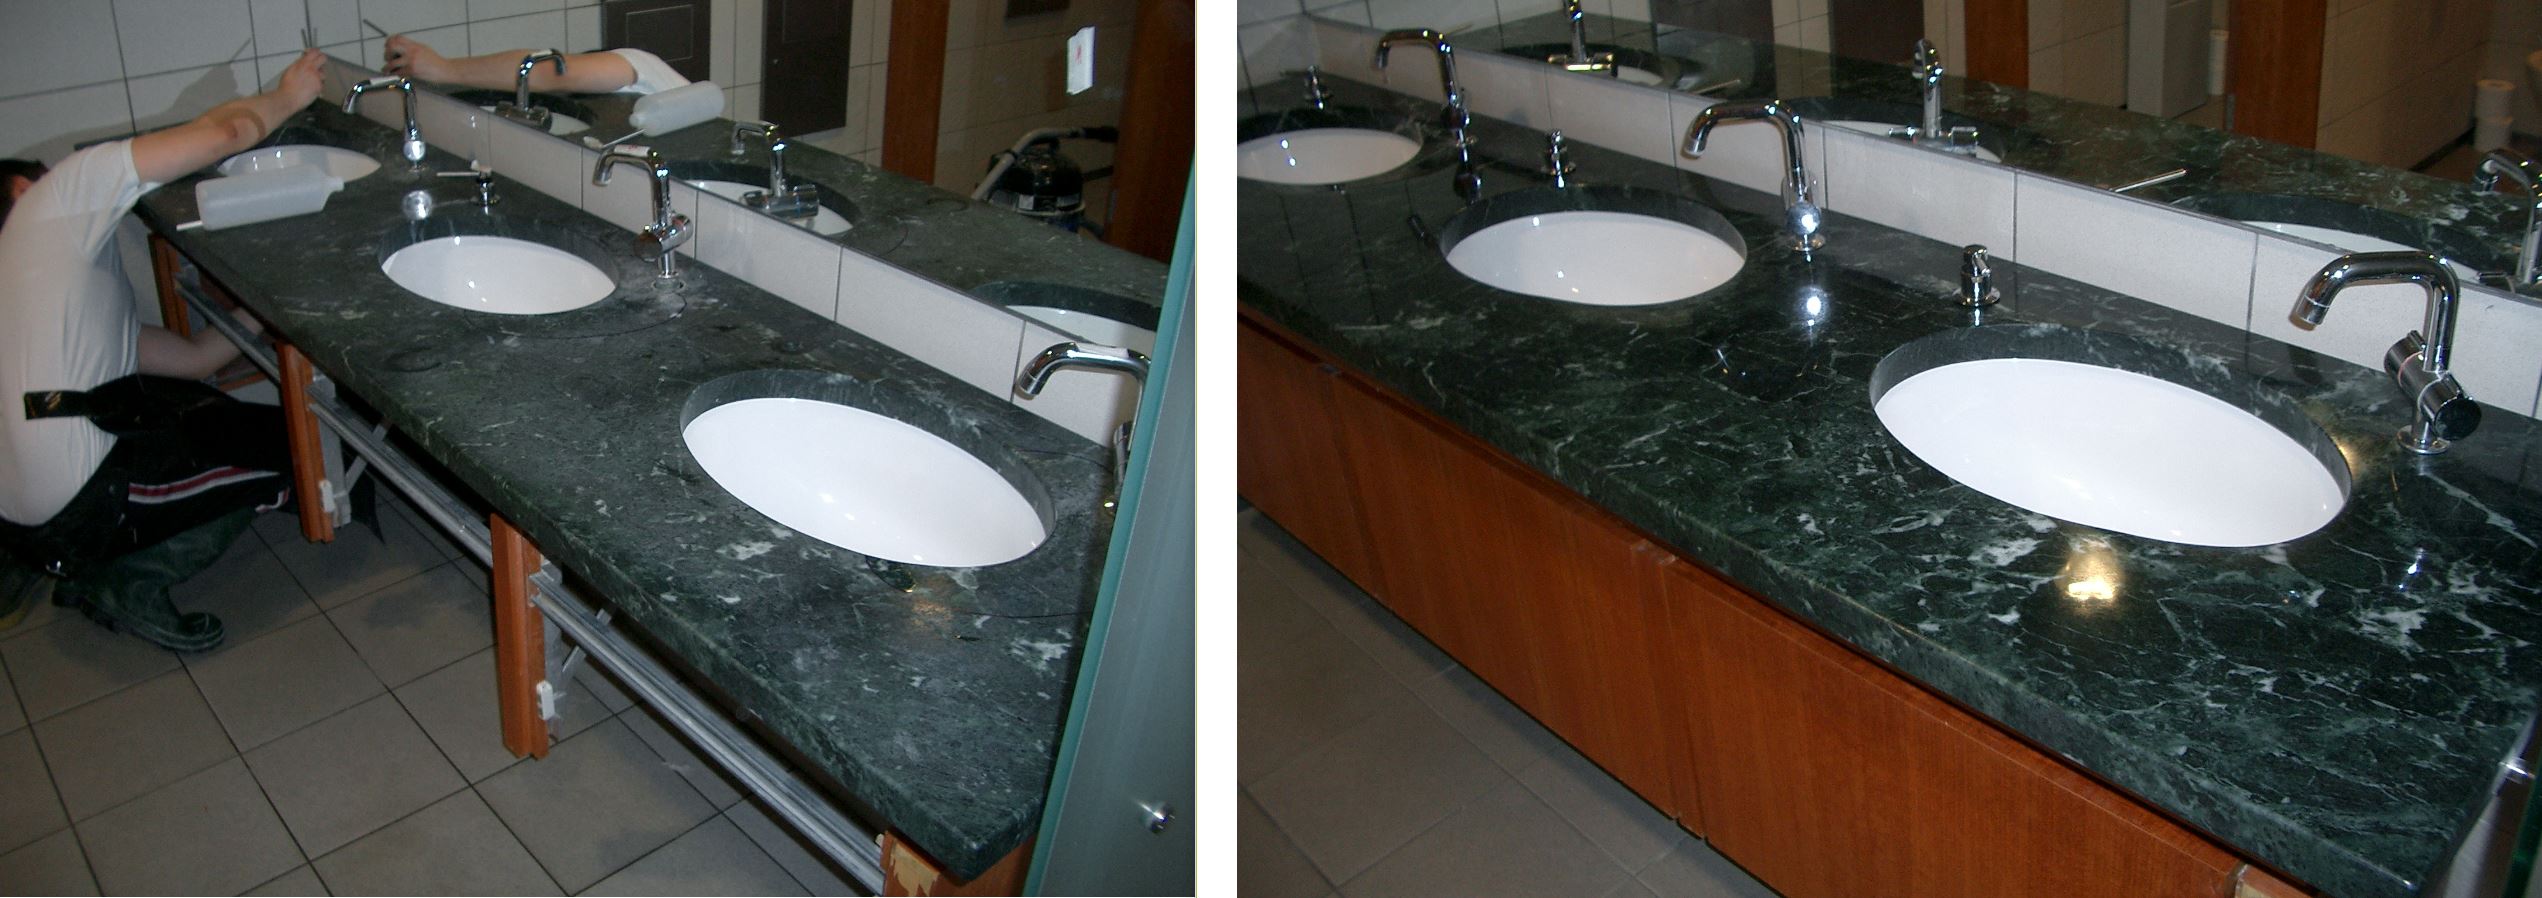 How To Re Marble Vanity Tops, Removing Scratches From Cultured Marble Vanity Tops